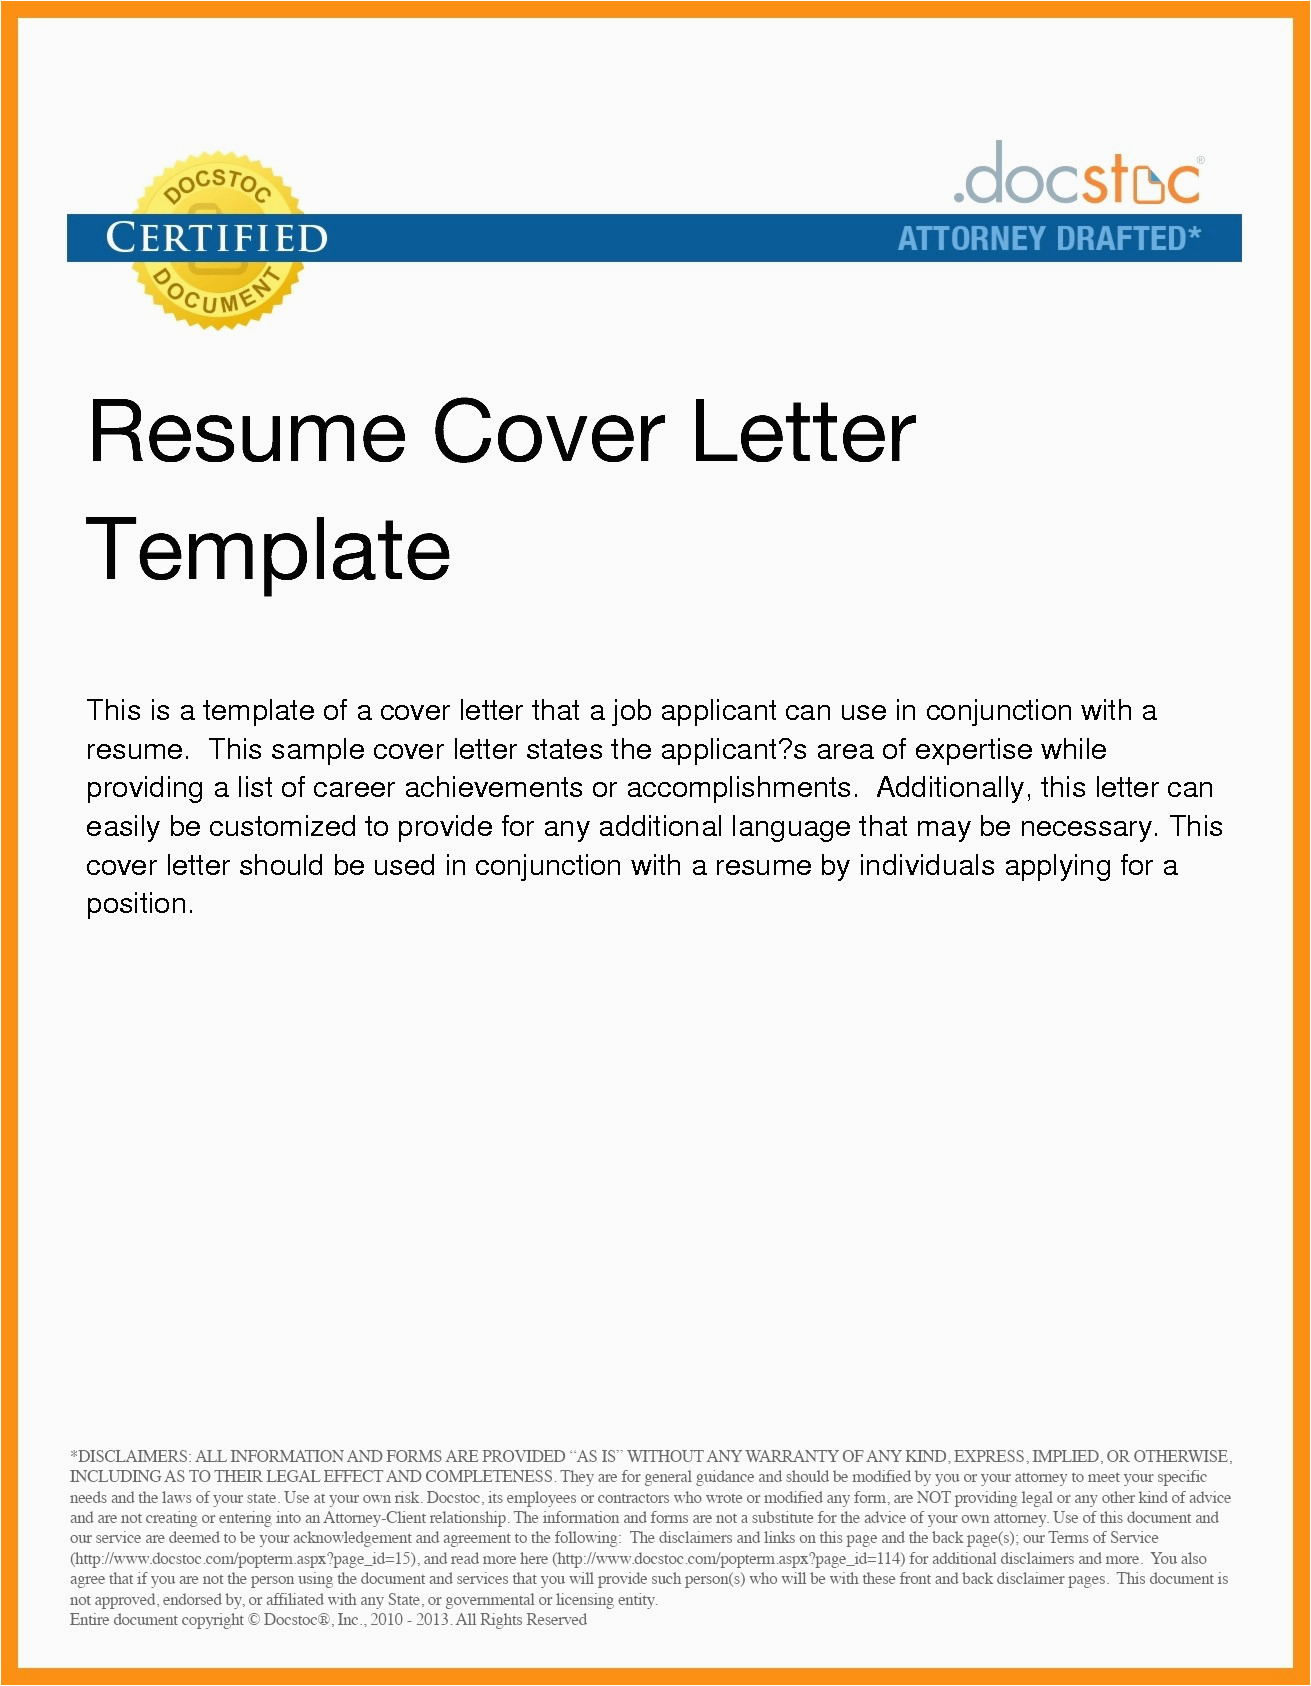 Sample Email for Sending Resume and Cover Letter Sending Resume and Cover Letter by Email Collection